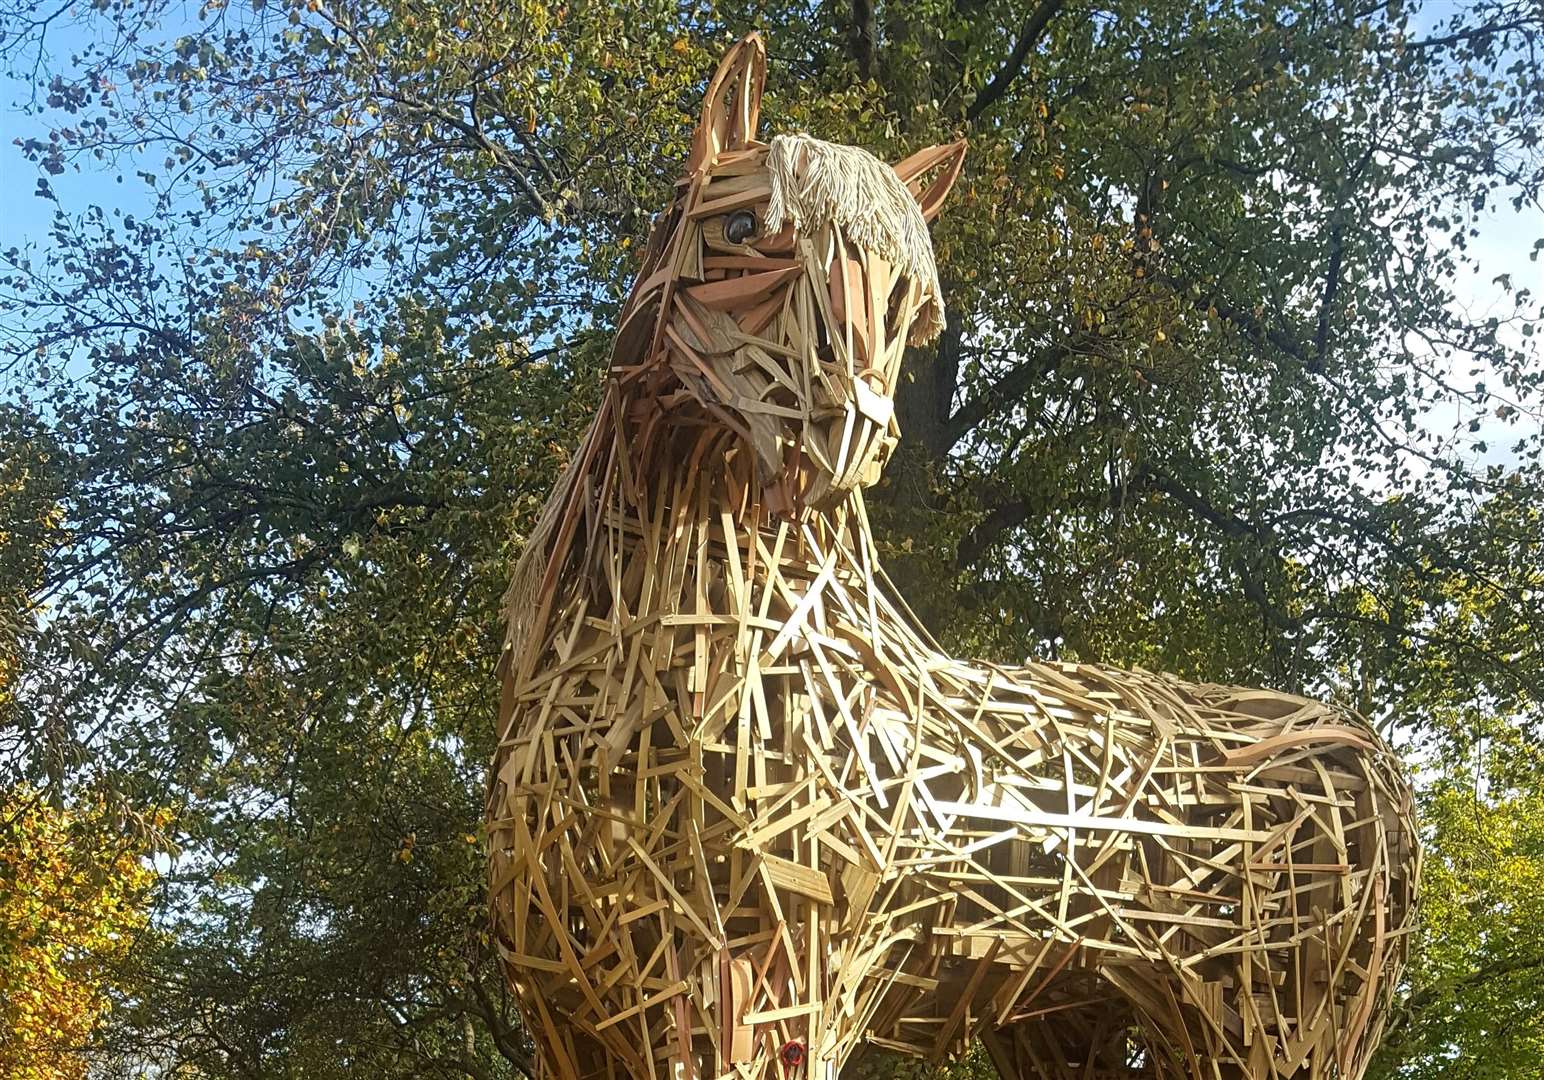 Students in Canterbury have created a 20ft war horse to mark the centenary of the Armistice